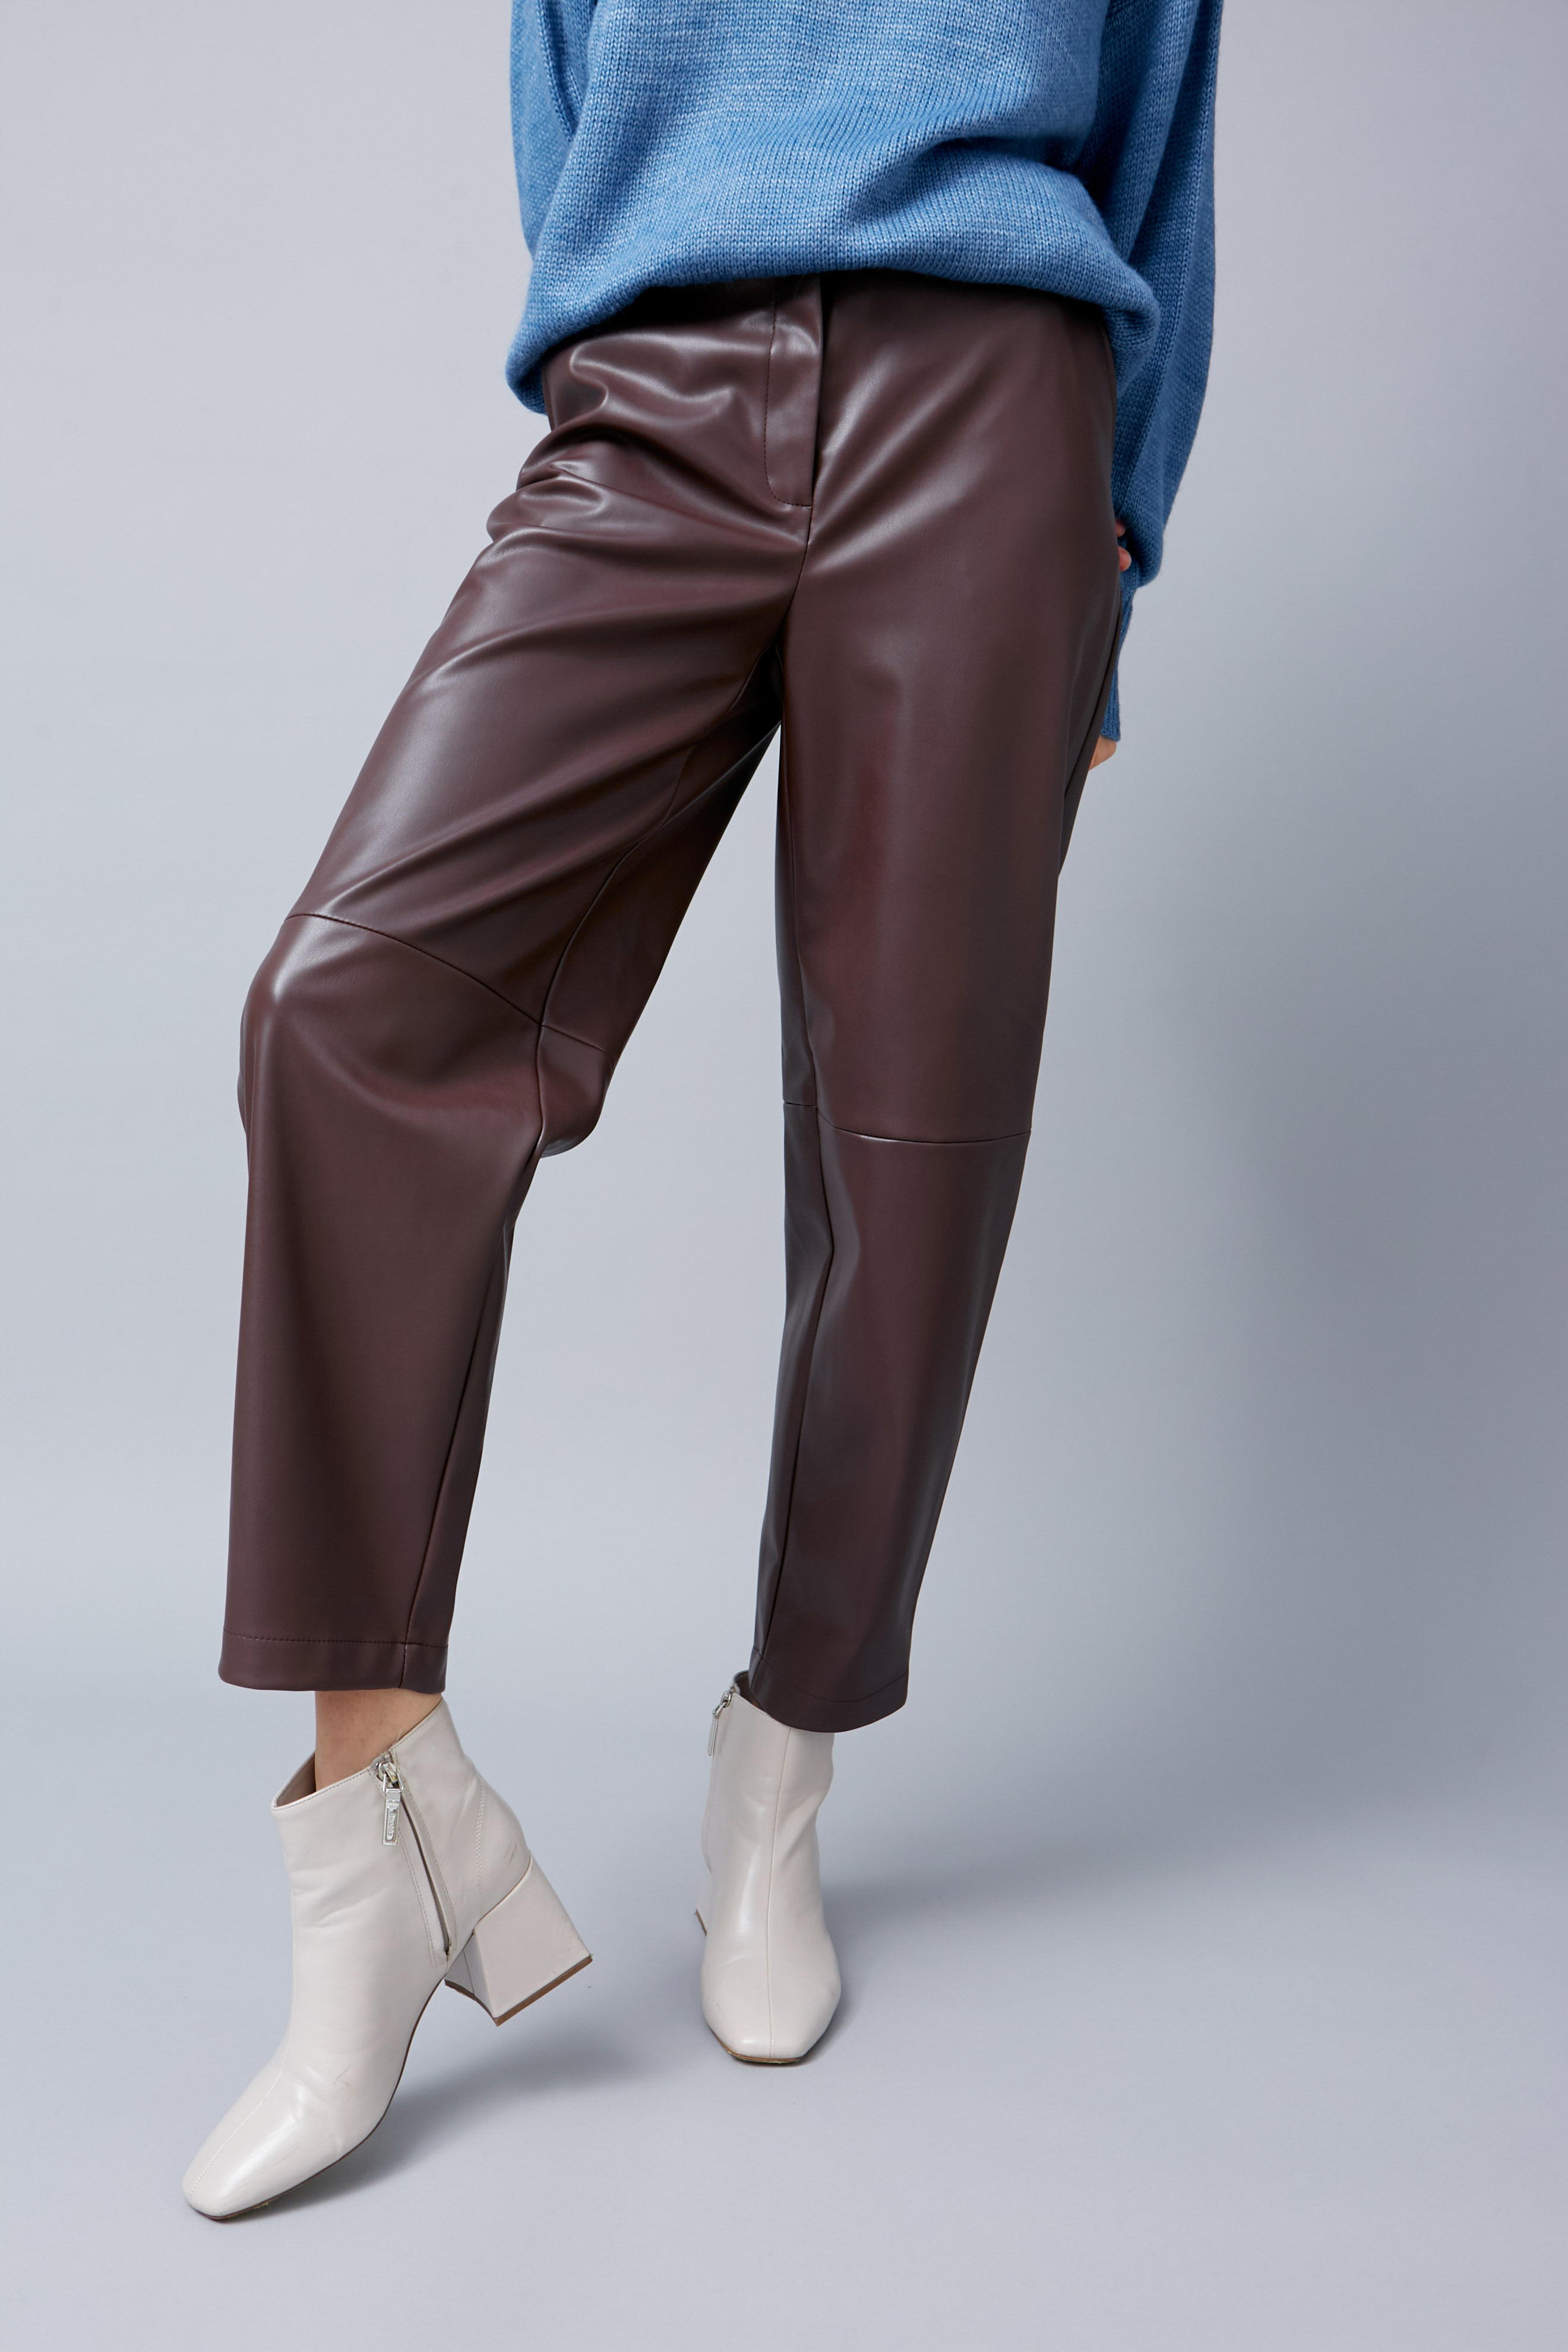 Brown faux leather trousers, photo 5